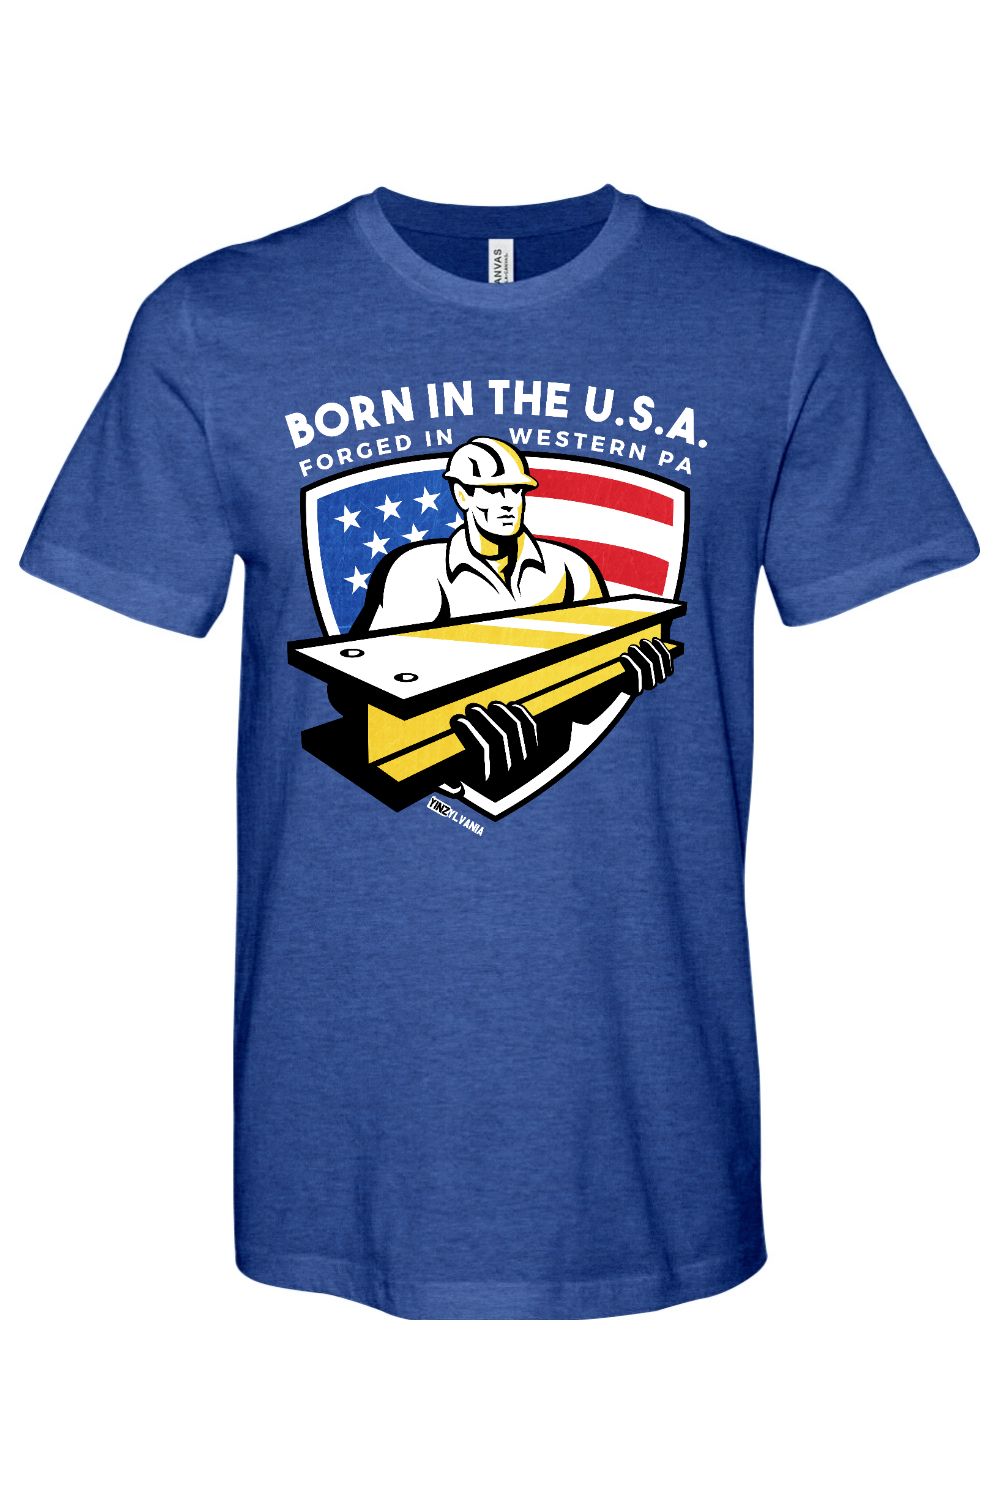 Born in the USA - Forged in Western PA - Bella + Canvas Heathered Jersey Tee - Yinzylvania